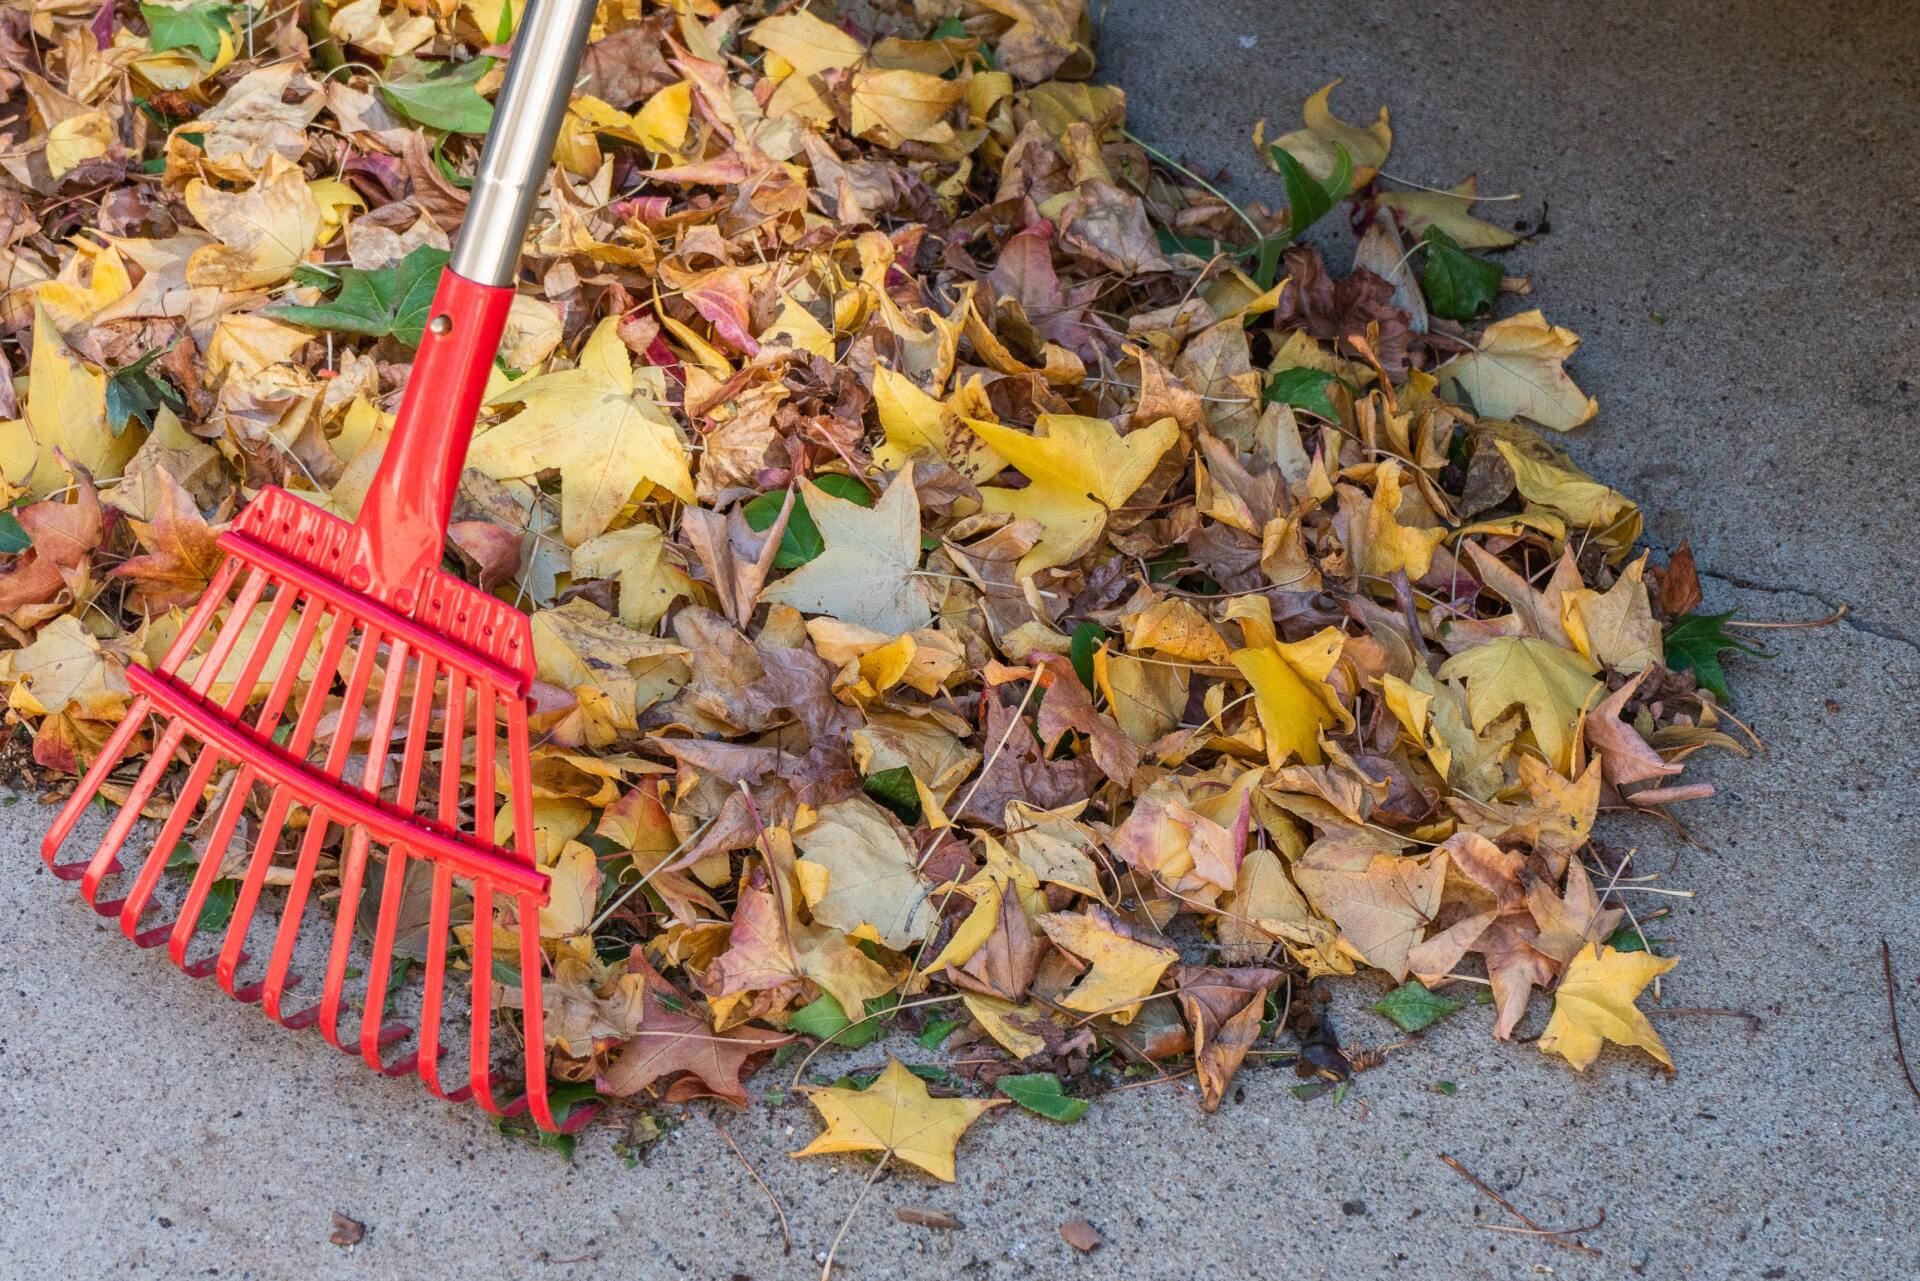 Person using a rake to gather and clear fallen leaves from the ground during autumn cleanup.